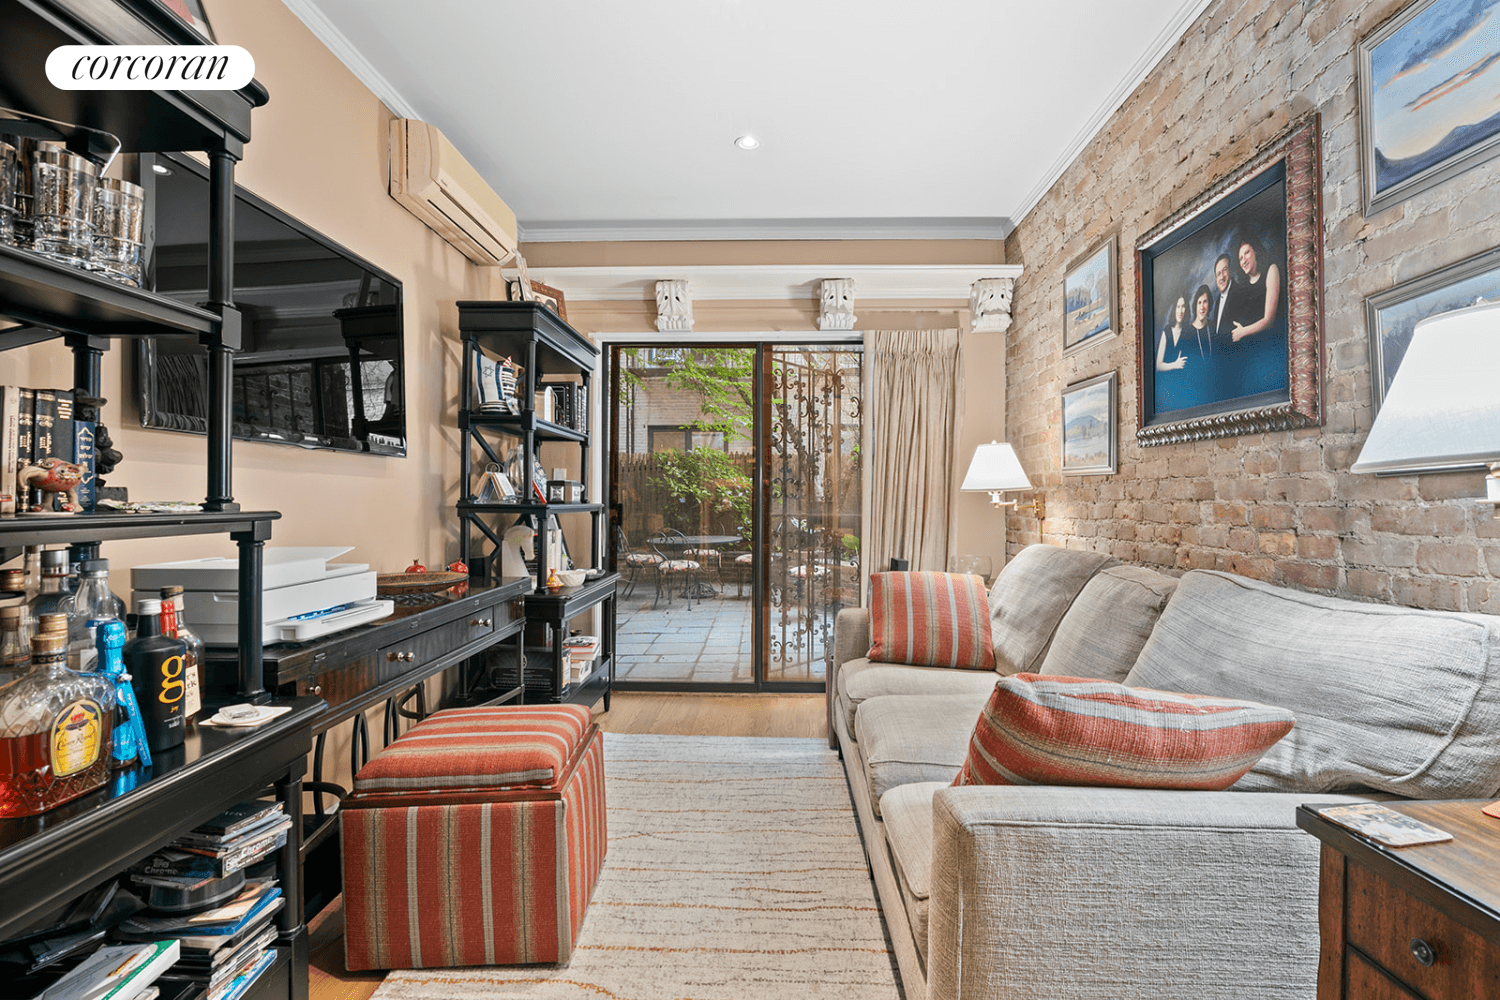 Nestled within a charming 19th century townhouse on a picturesque block by Riverside Park, this duplex garden apartment offers an abundance of indoor and outdoor living space in a prime ...